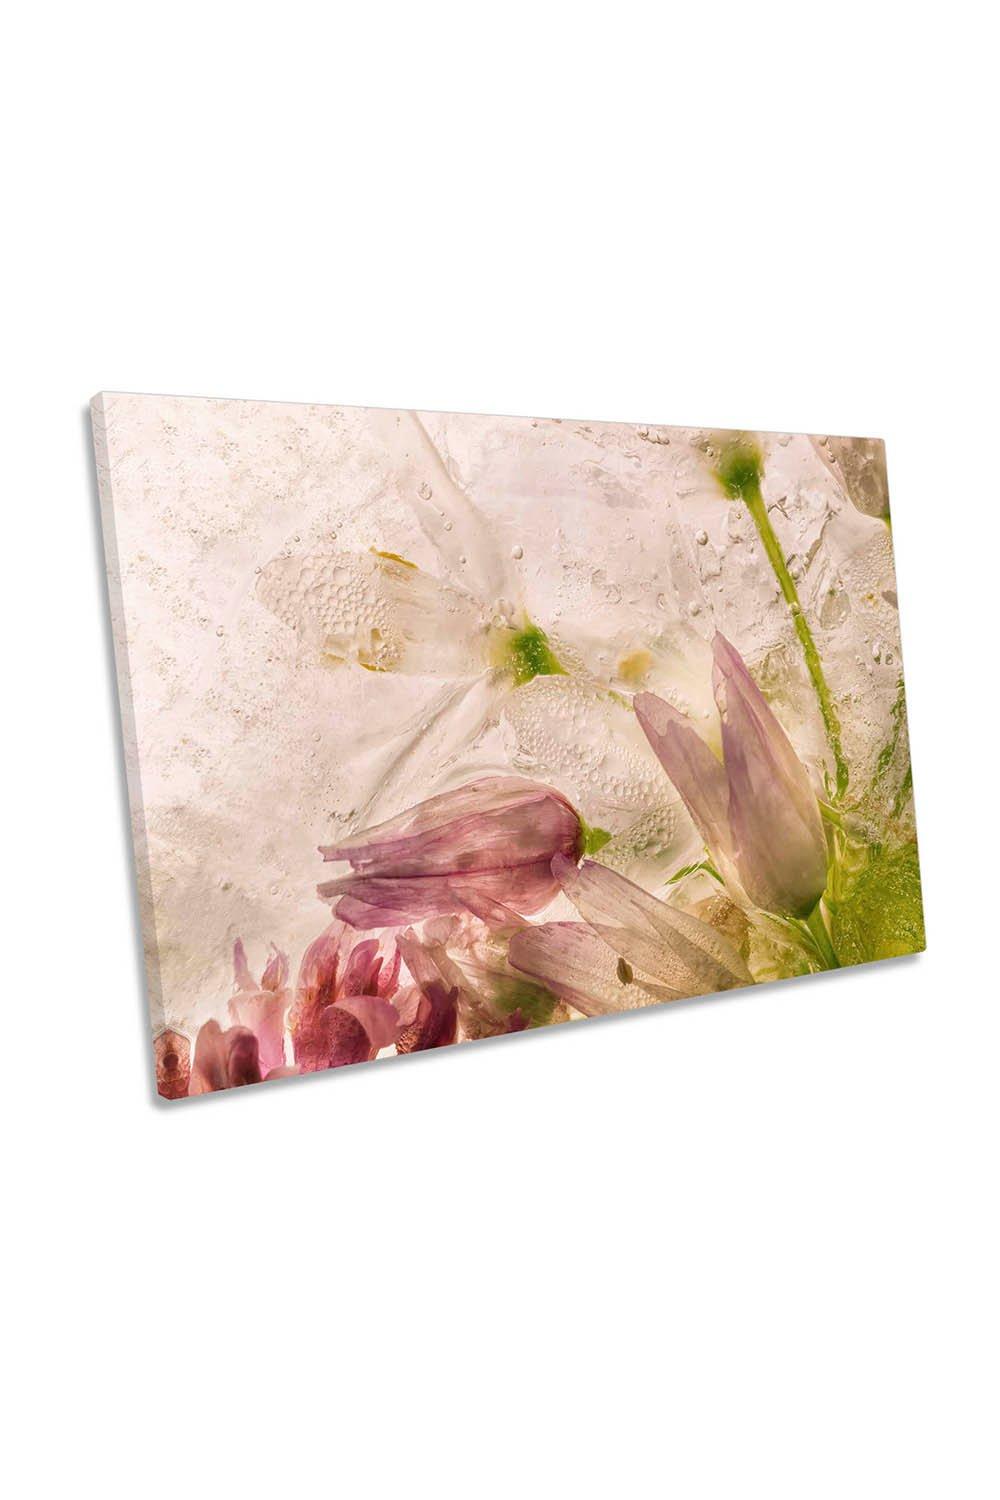 Glacial Rose Floral Flower Canvas Wall Art Picture Print